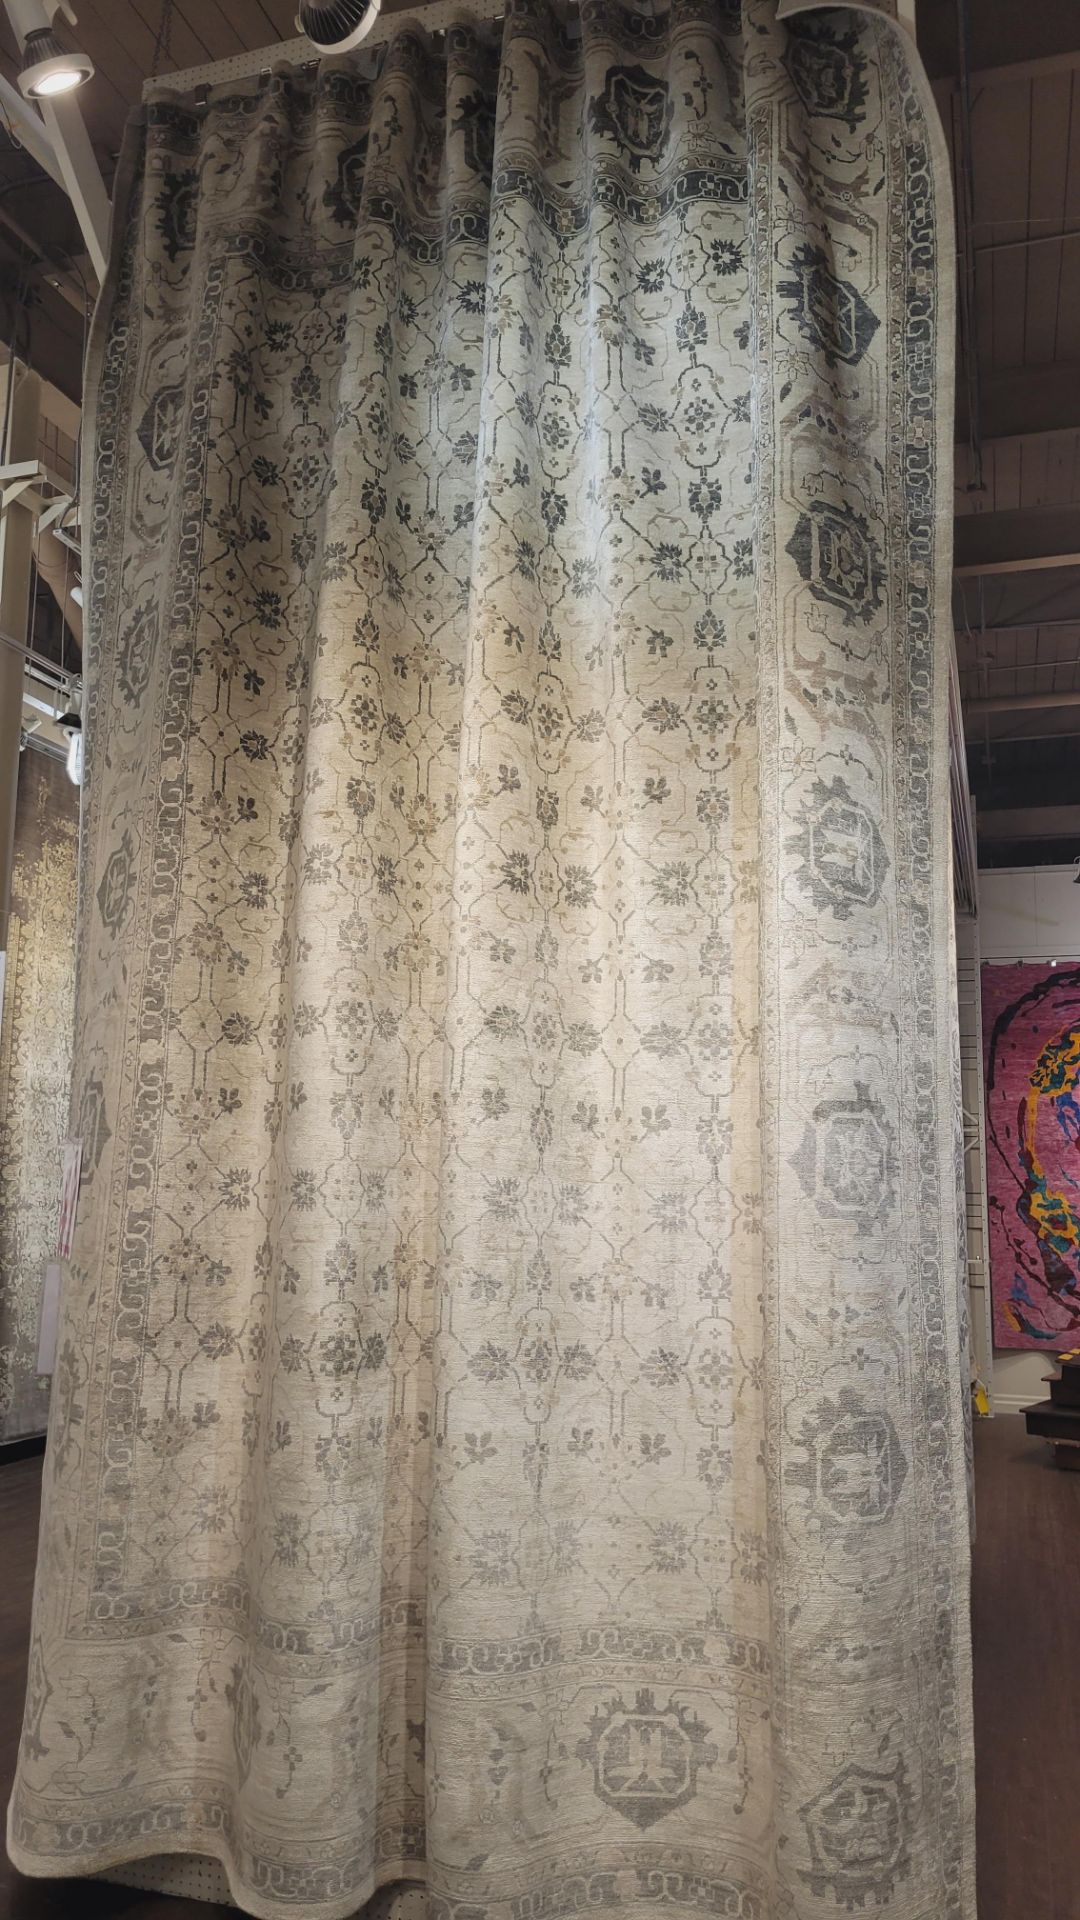 12' X 15' BAMBOO SILK HAND KNOTTED IN INDIA - MSRP $12,999.00 - INVENTORY CODE: DREAM 216142 IV/